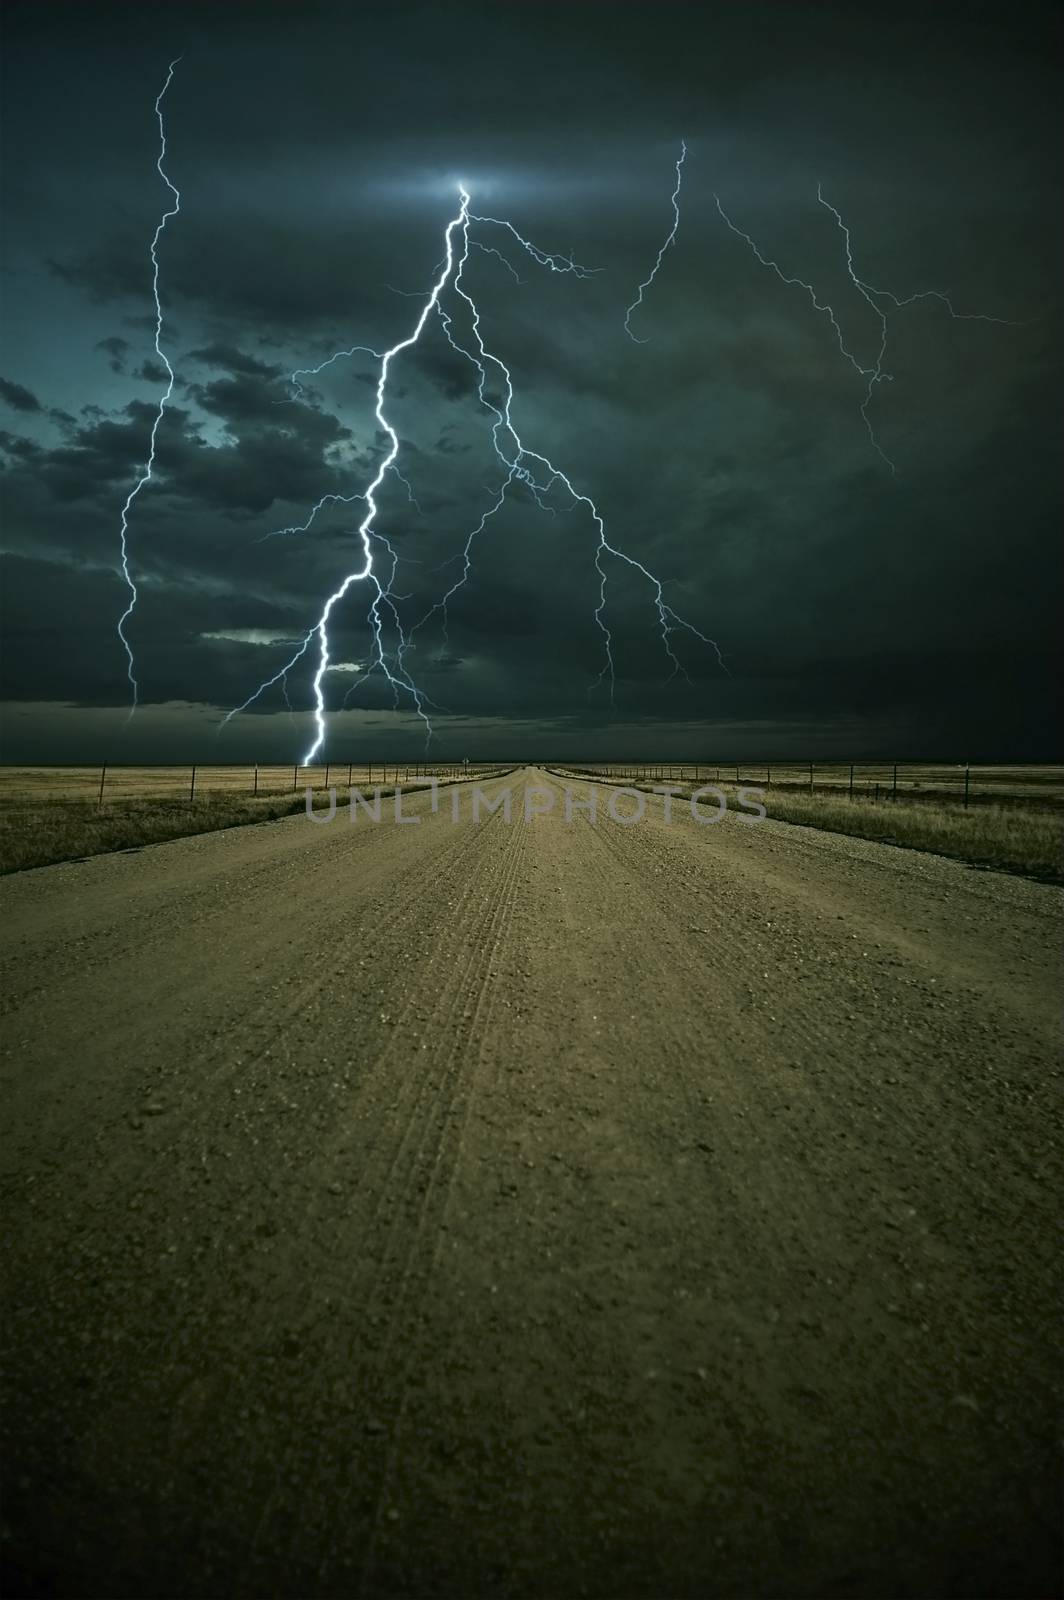 Lightning Storm Ahead by welcomia